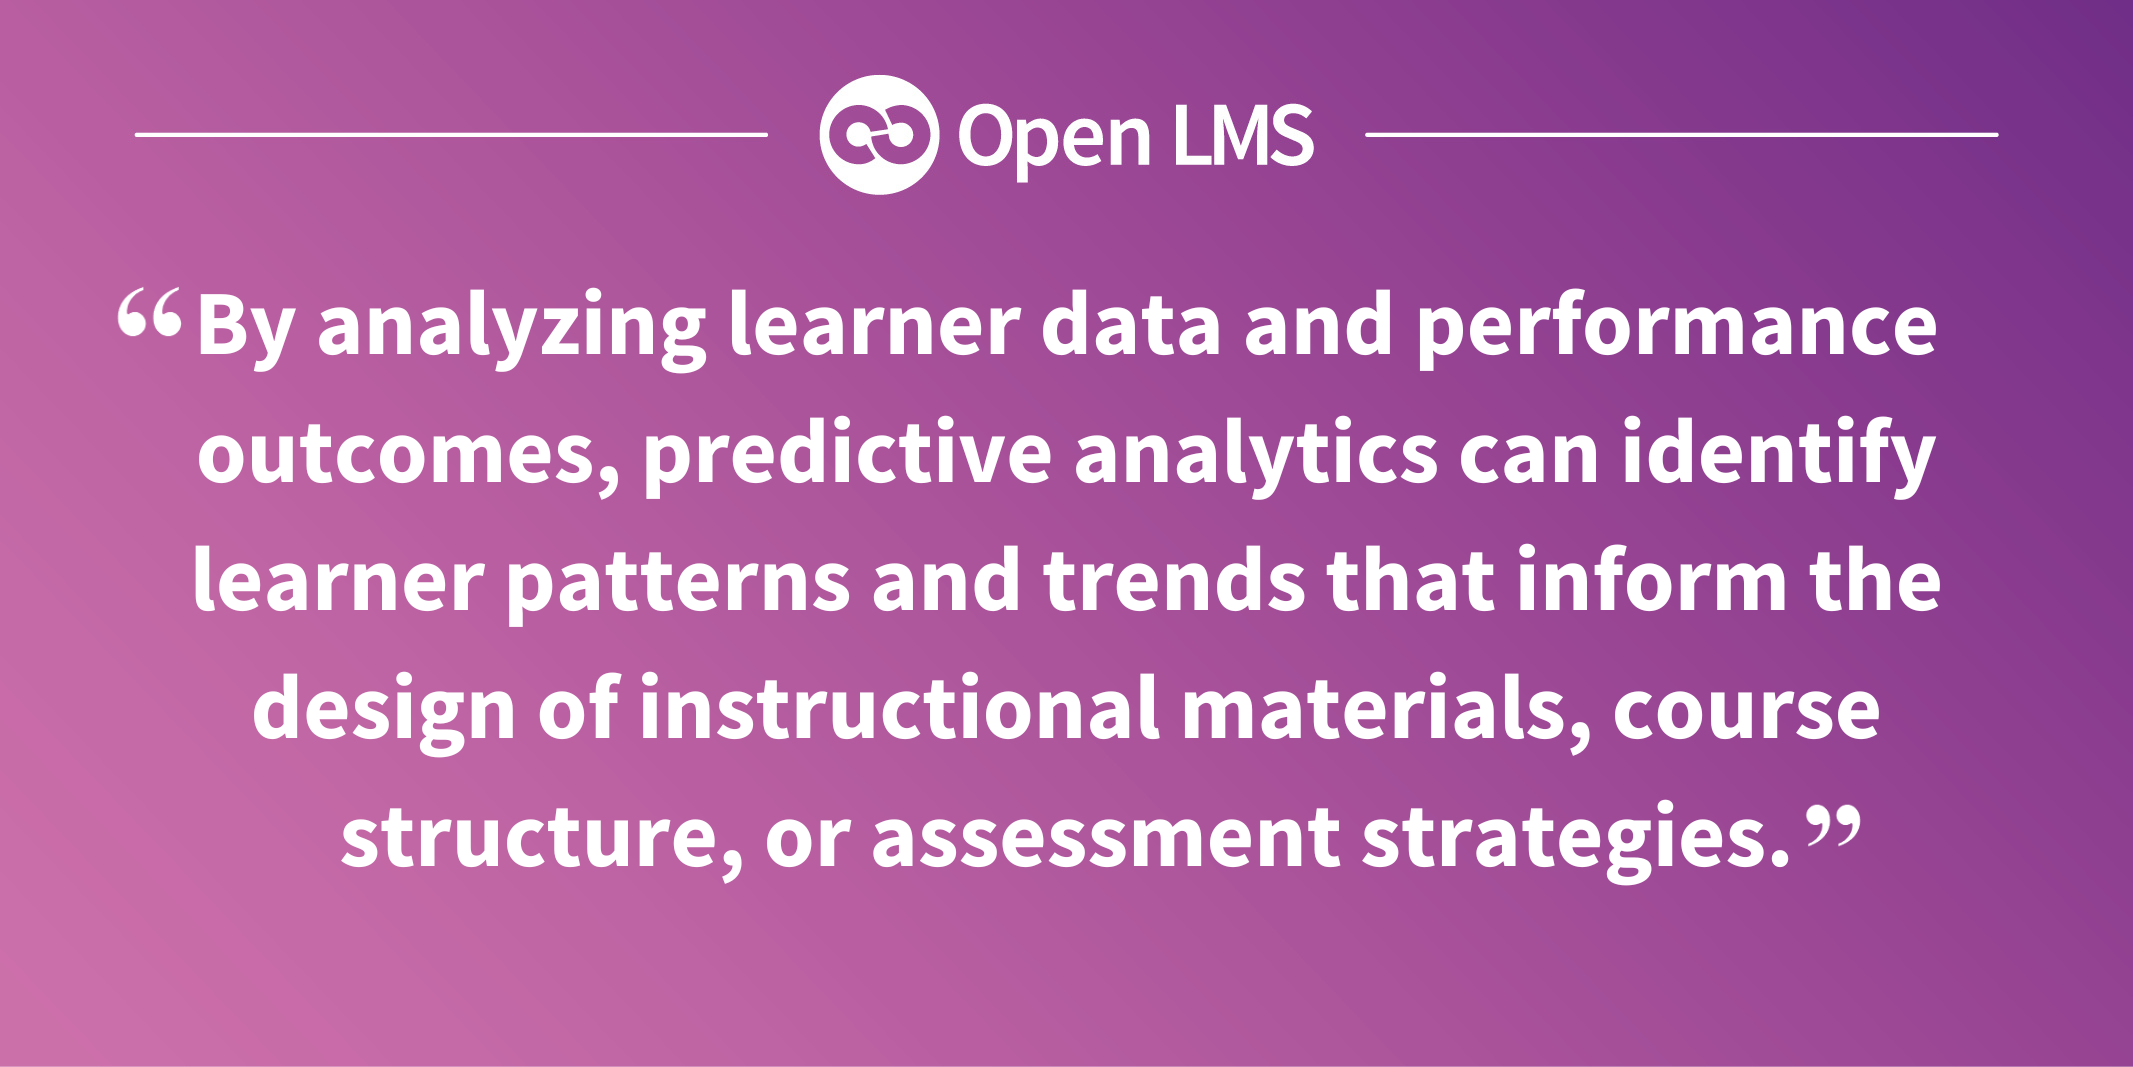 By analyzing learner data and performance outcomes, predictive analytics can identify learner patterns and trends that inform the design of instructional materials, course structure, or assessment strategies.